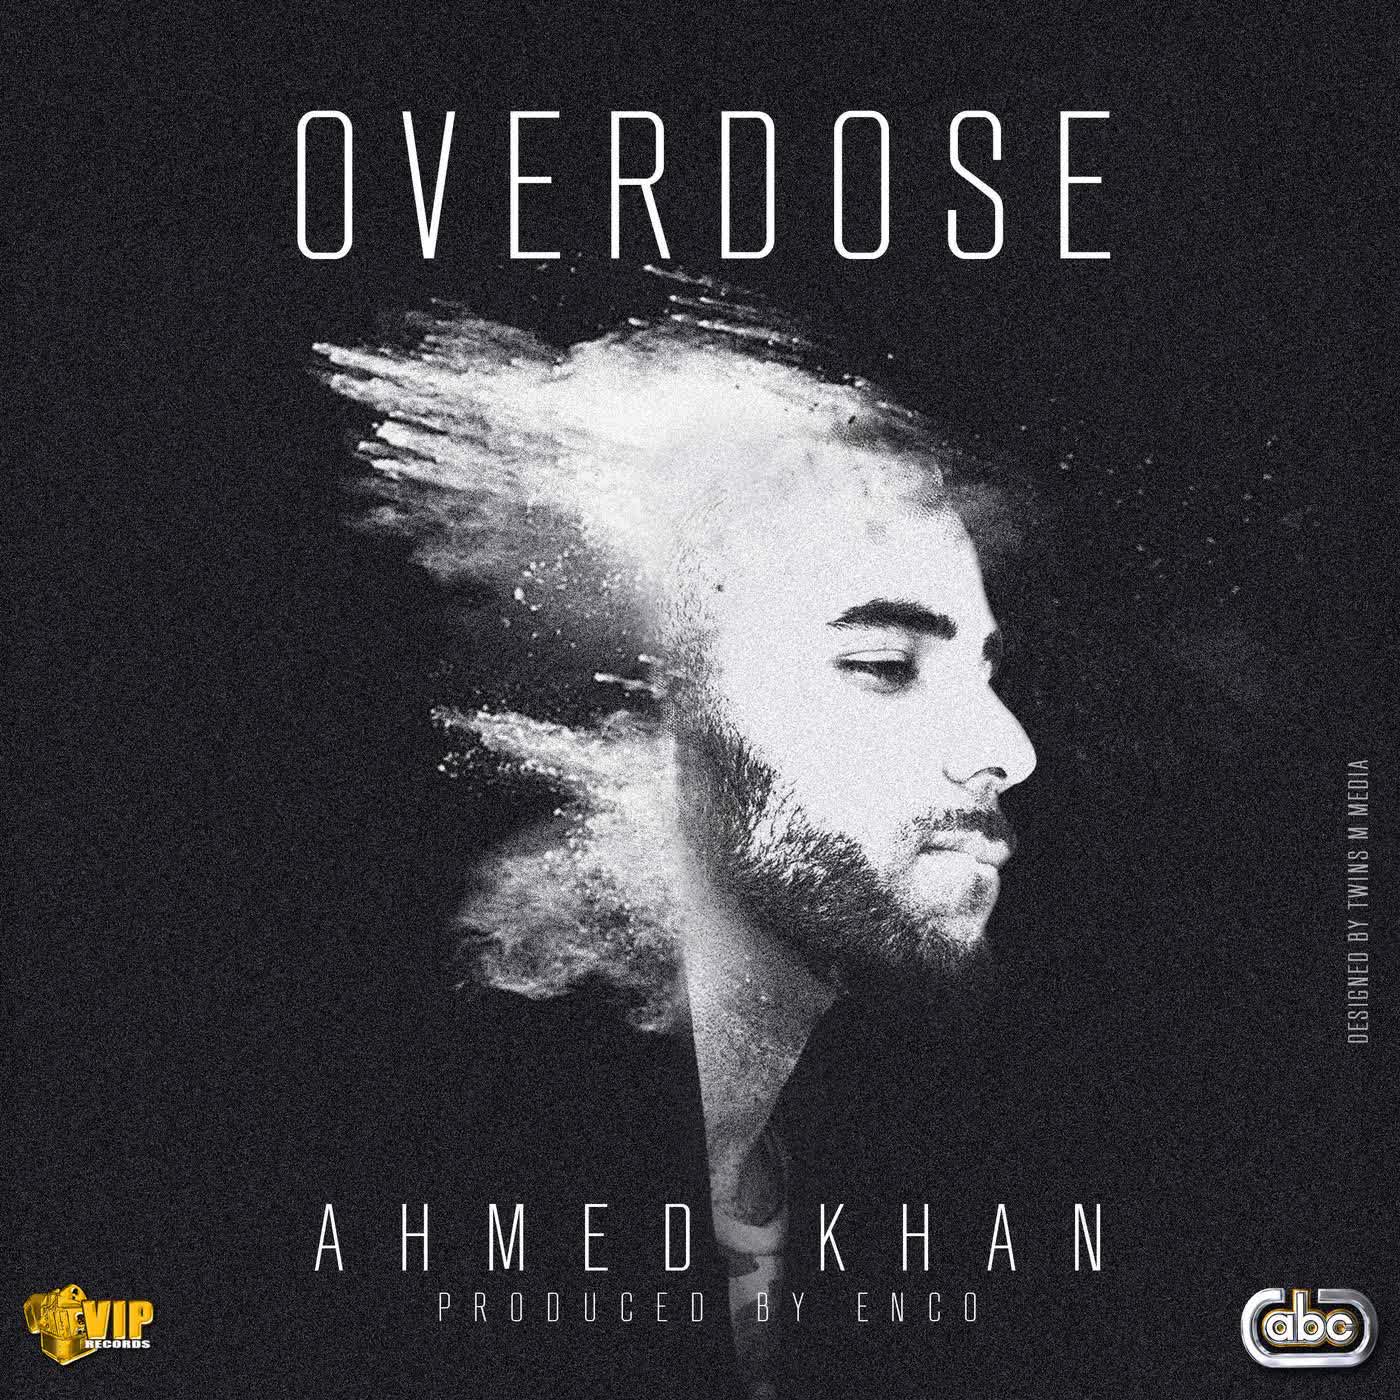 Overdose Ahmed Khan  Mp3 song download